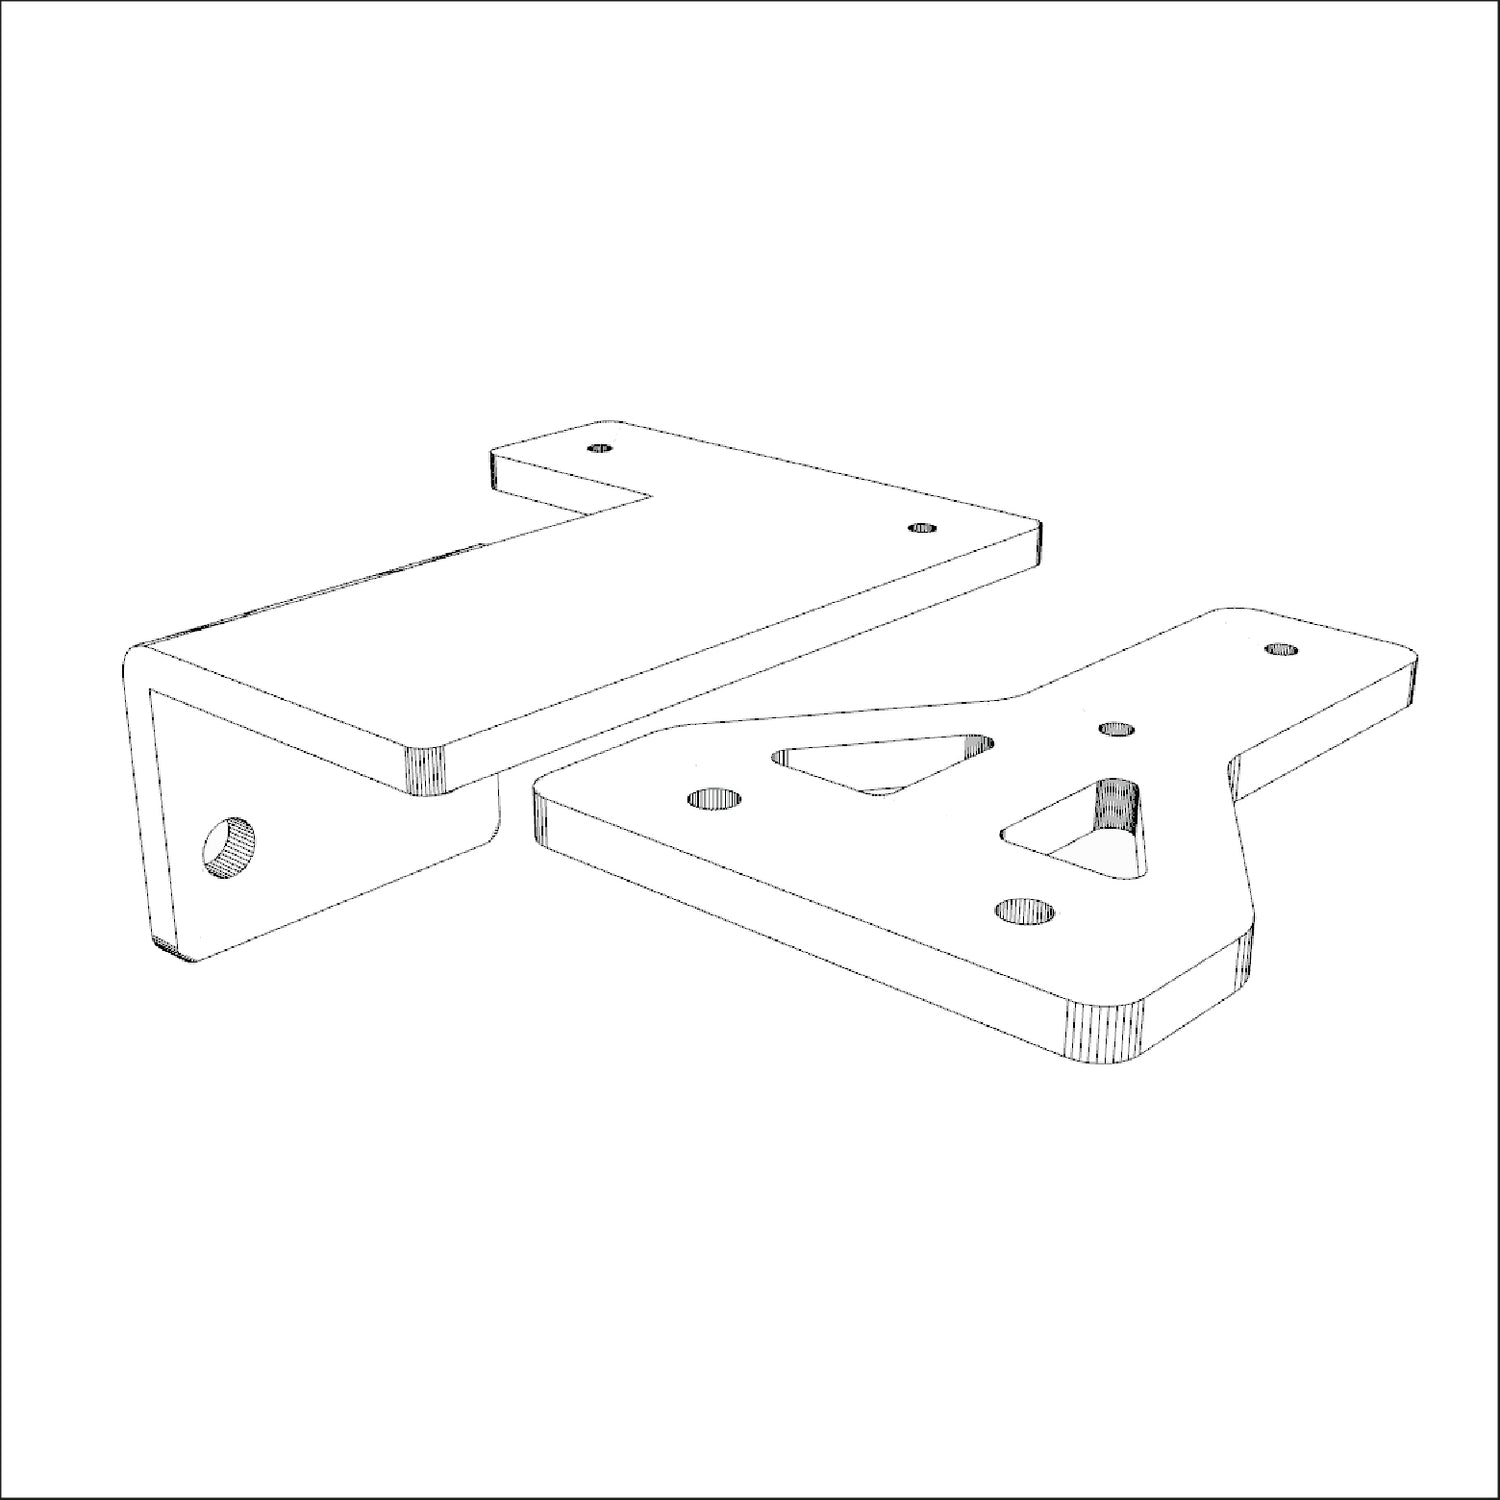 Drag Chain connection Plates kit